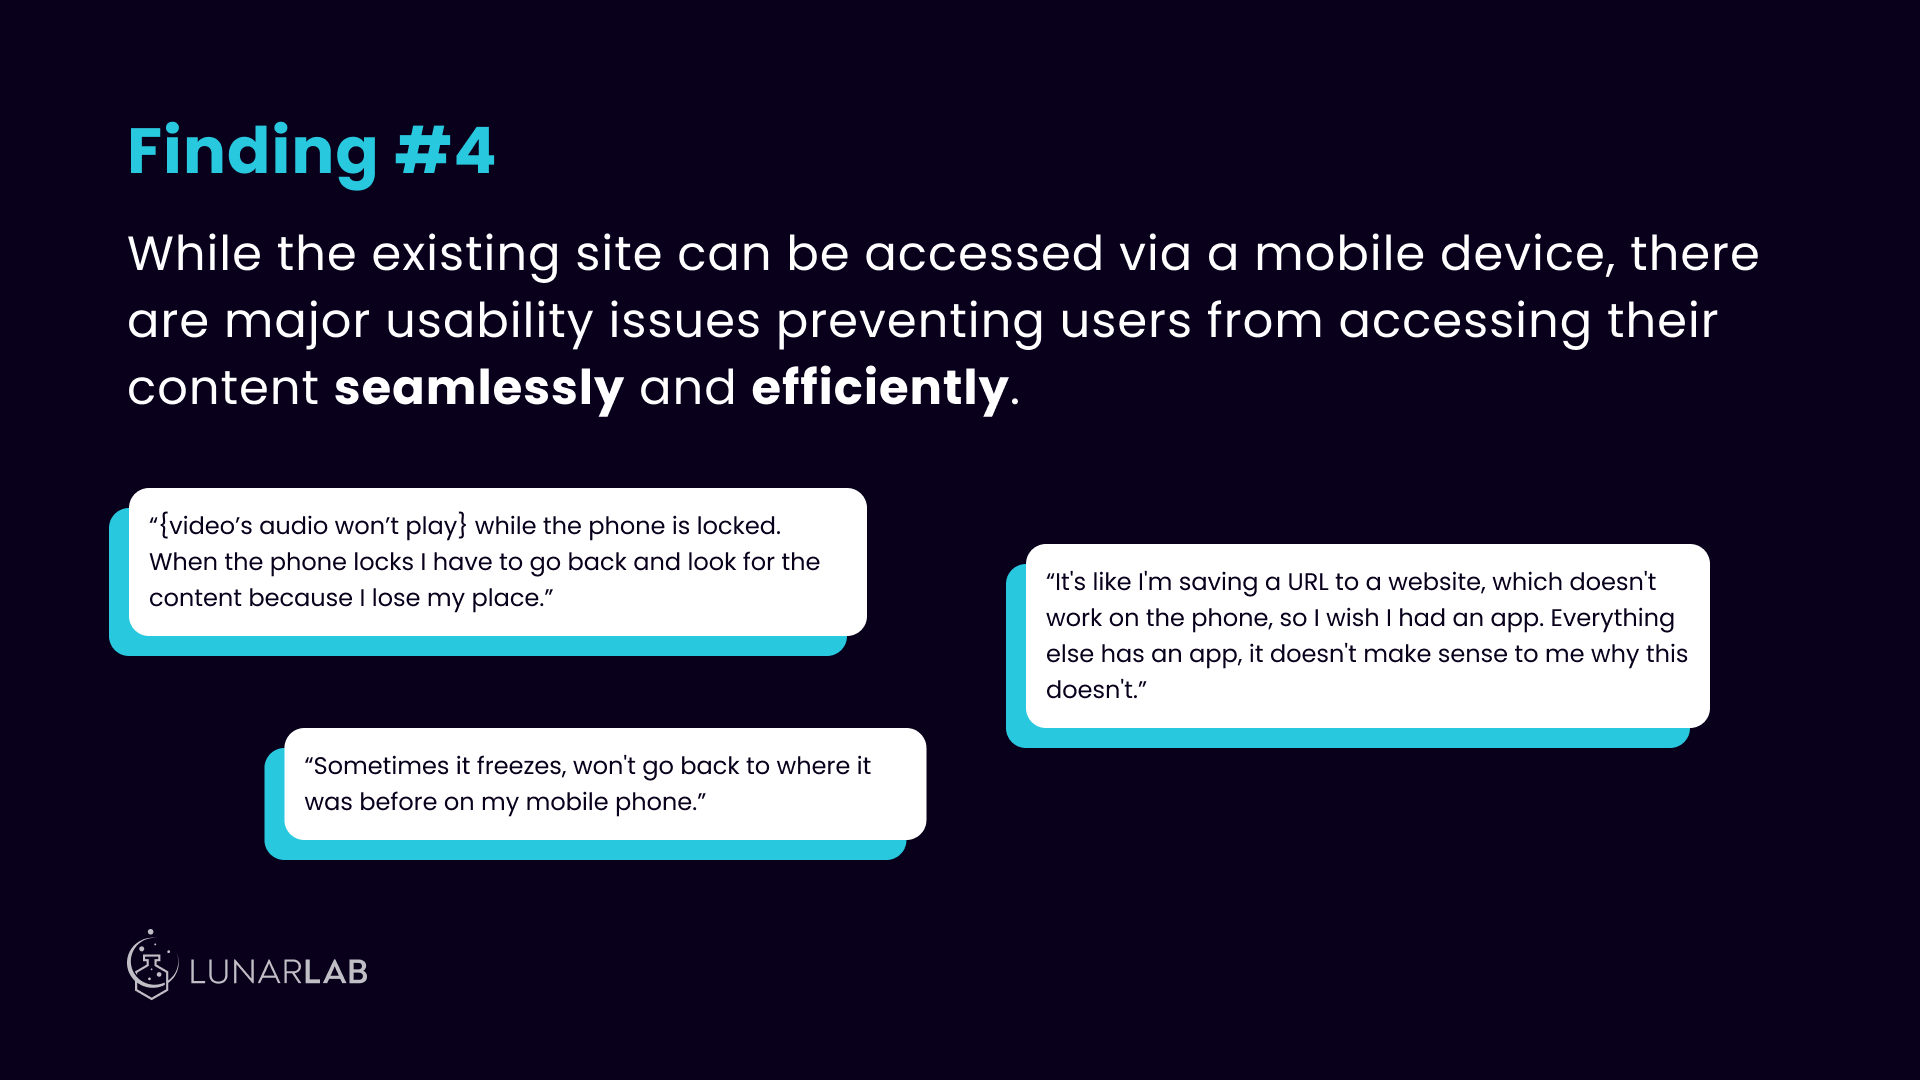 Research report finding #4: While the existing site can be accessed via a mobile device, there are major usability issues preventing users from accessing their content seamlessly and efficiently.